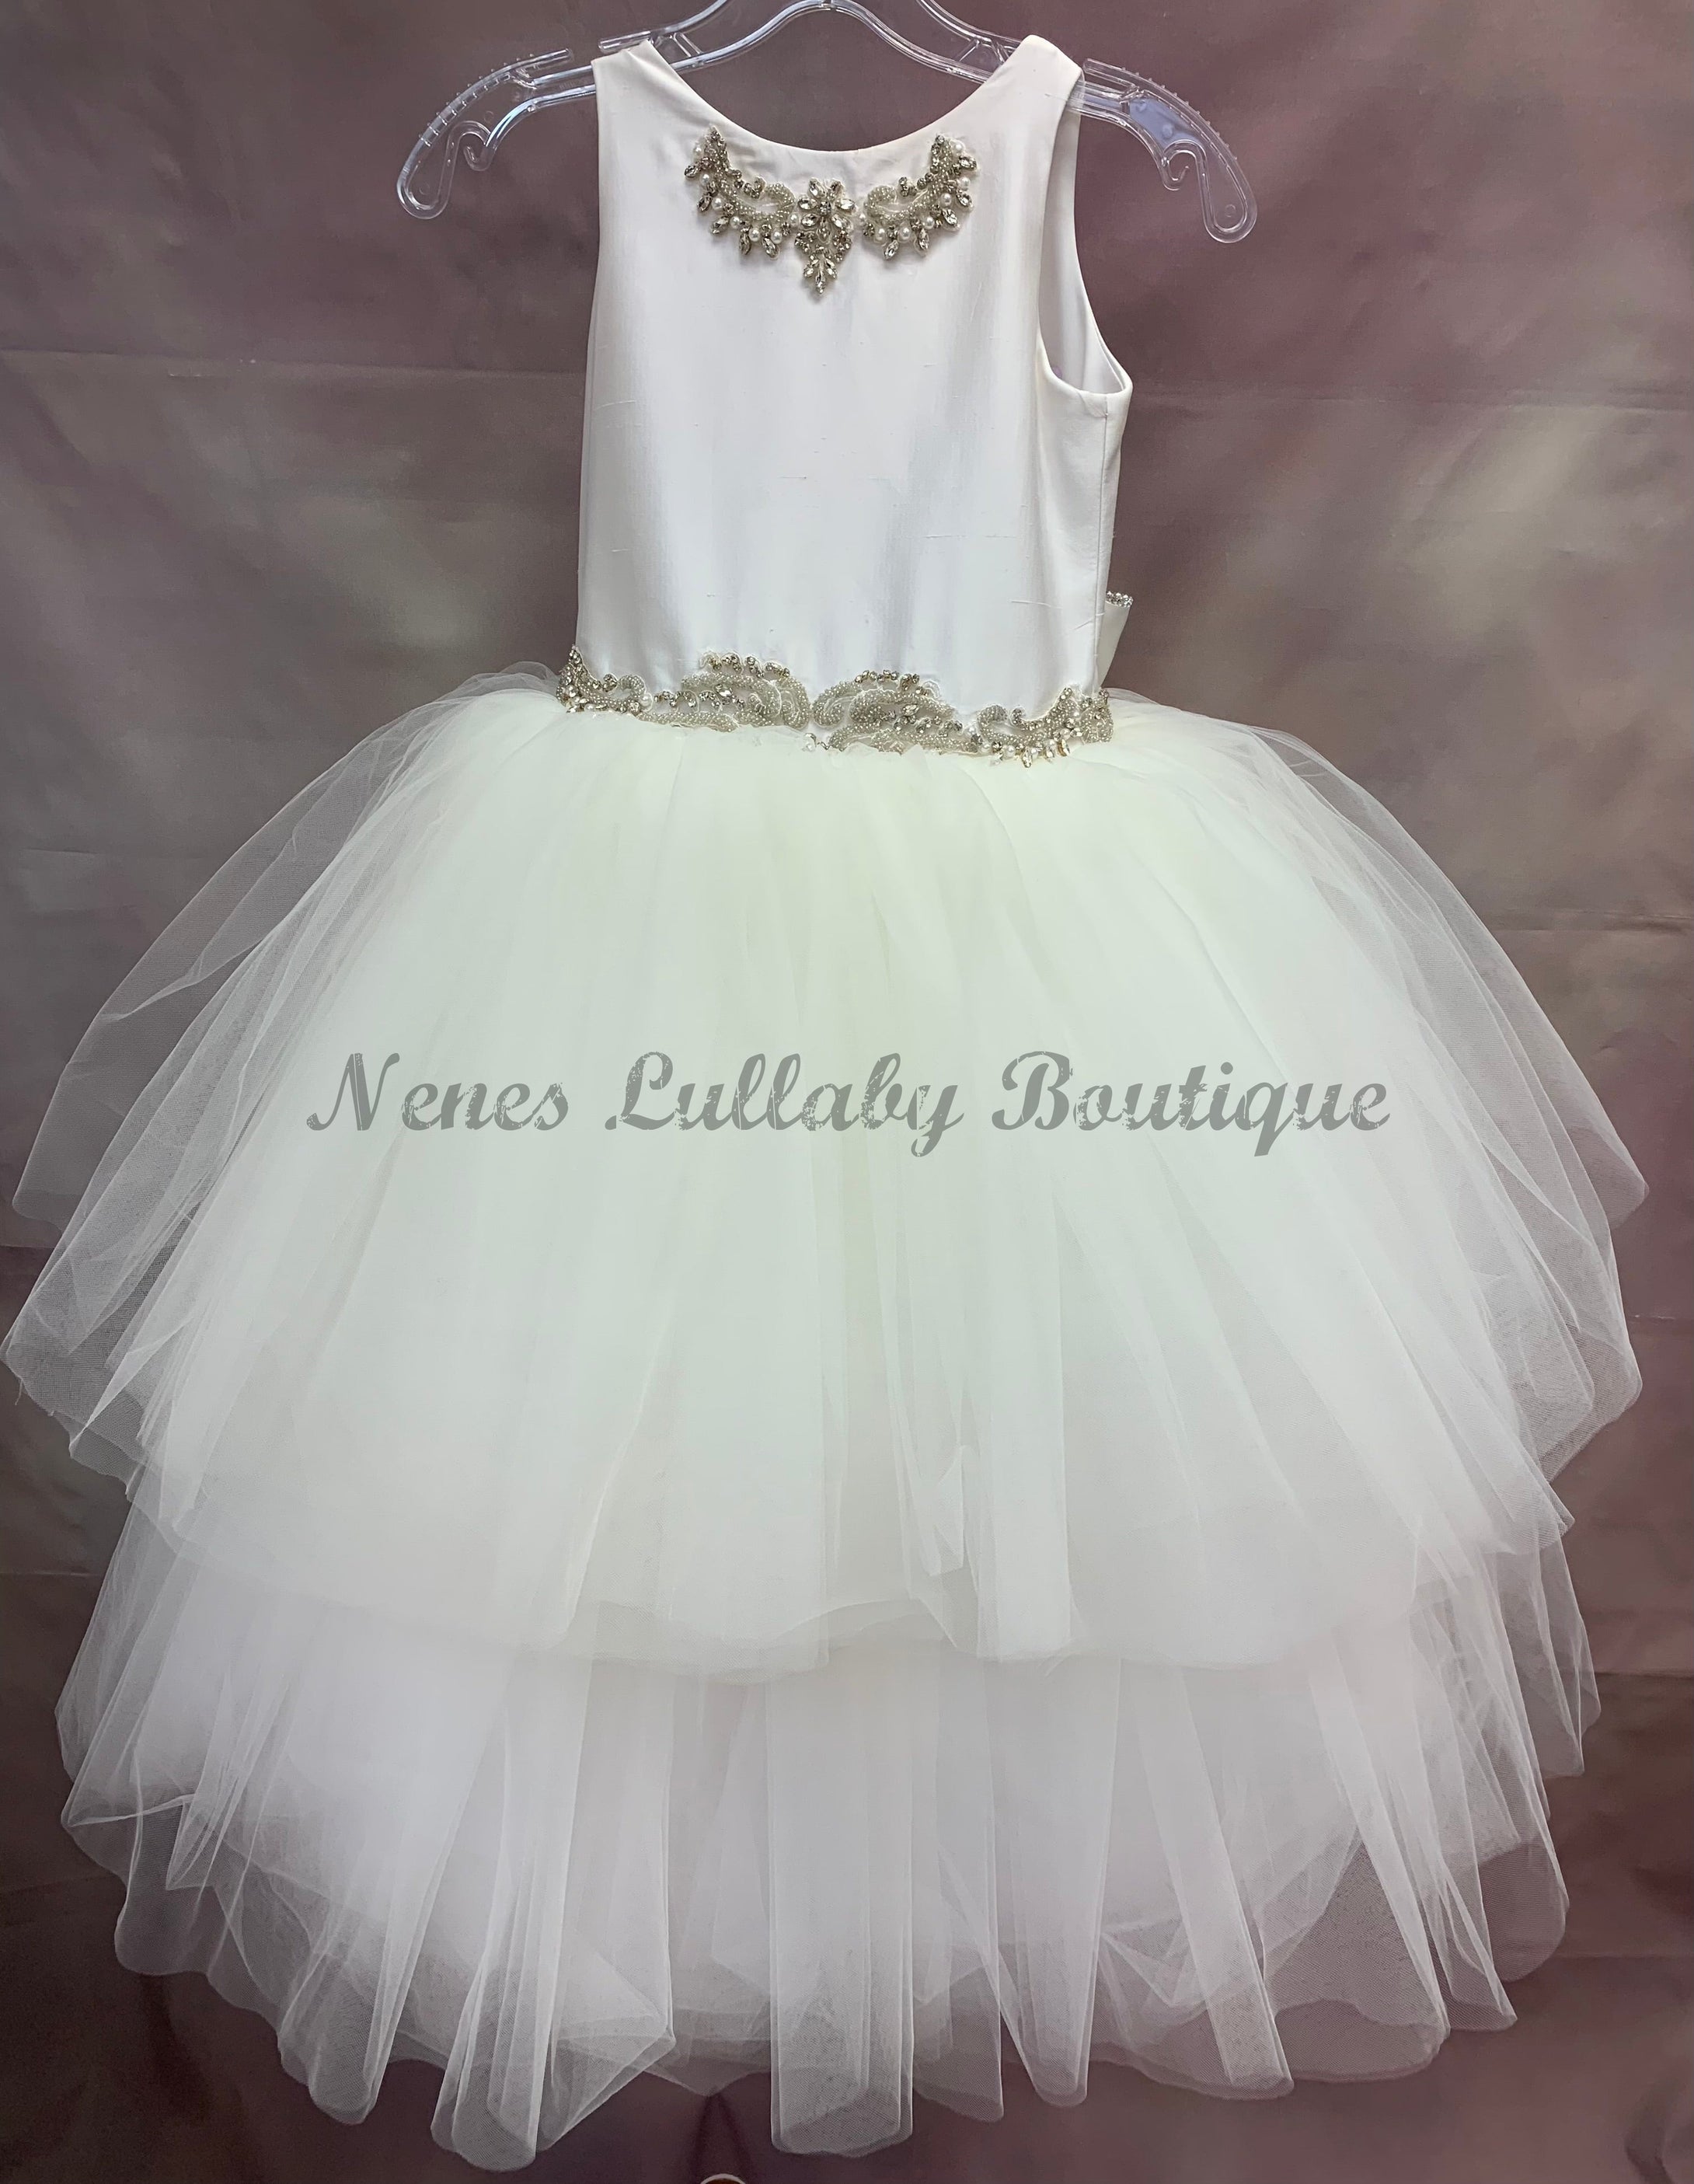 Dominique Custom Communion Dress with Jeweled Silk top & two tier tulle skirt by Piccolo Bacio Couture